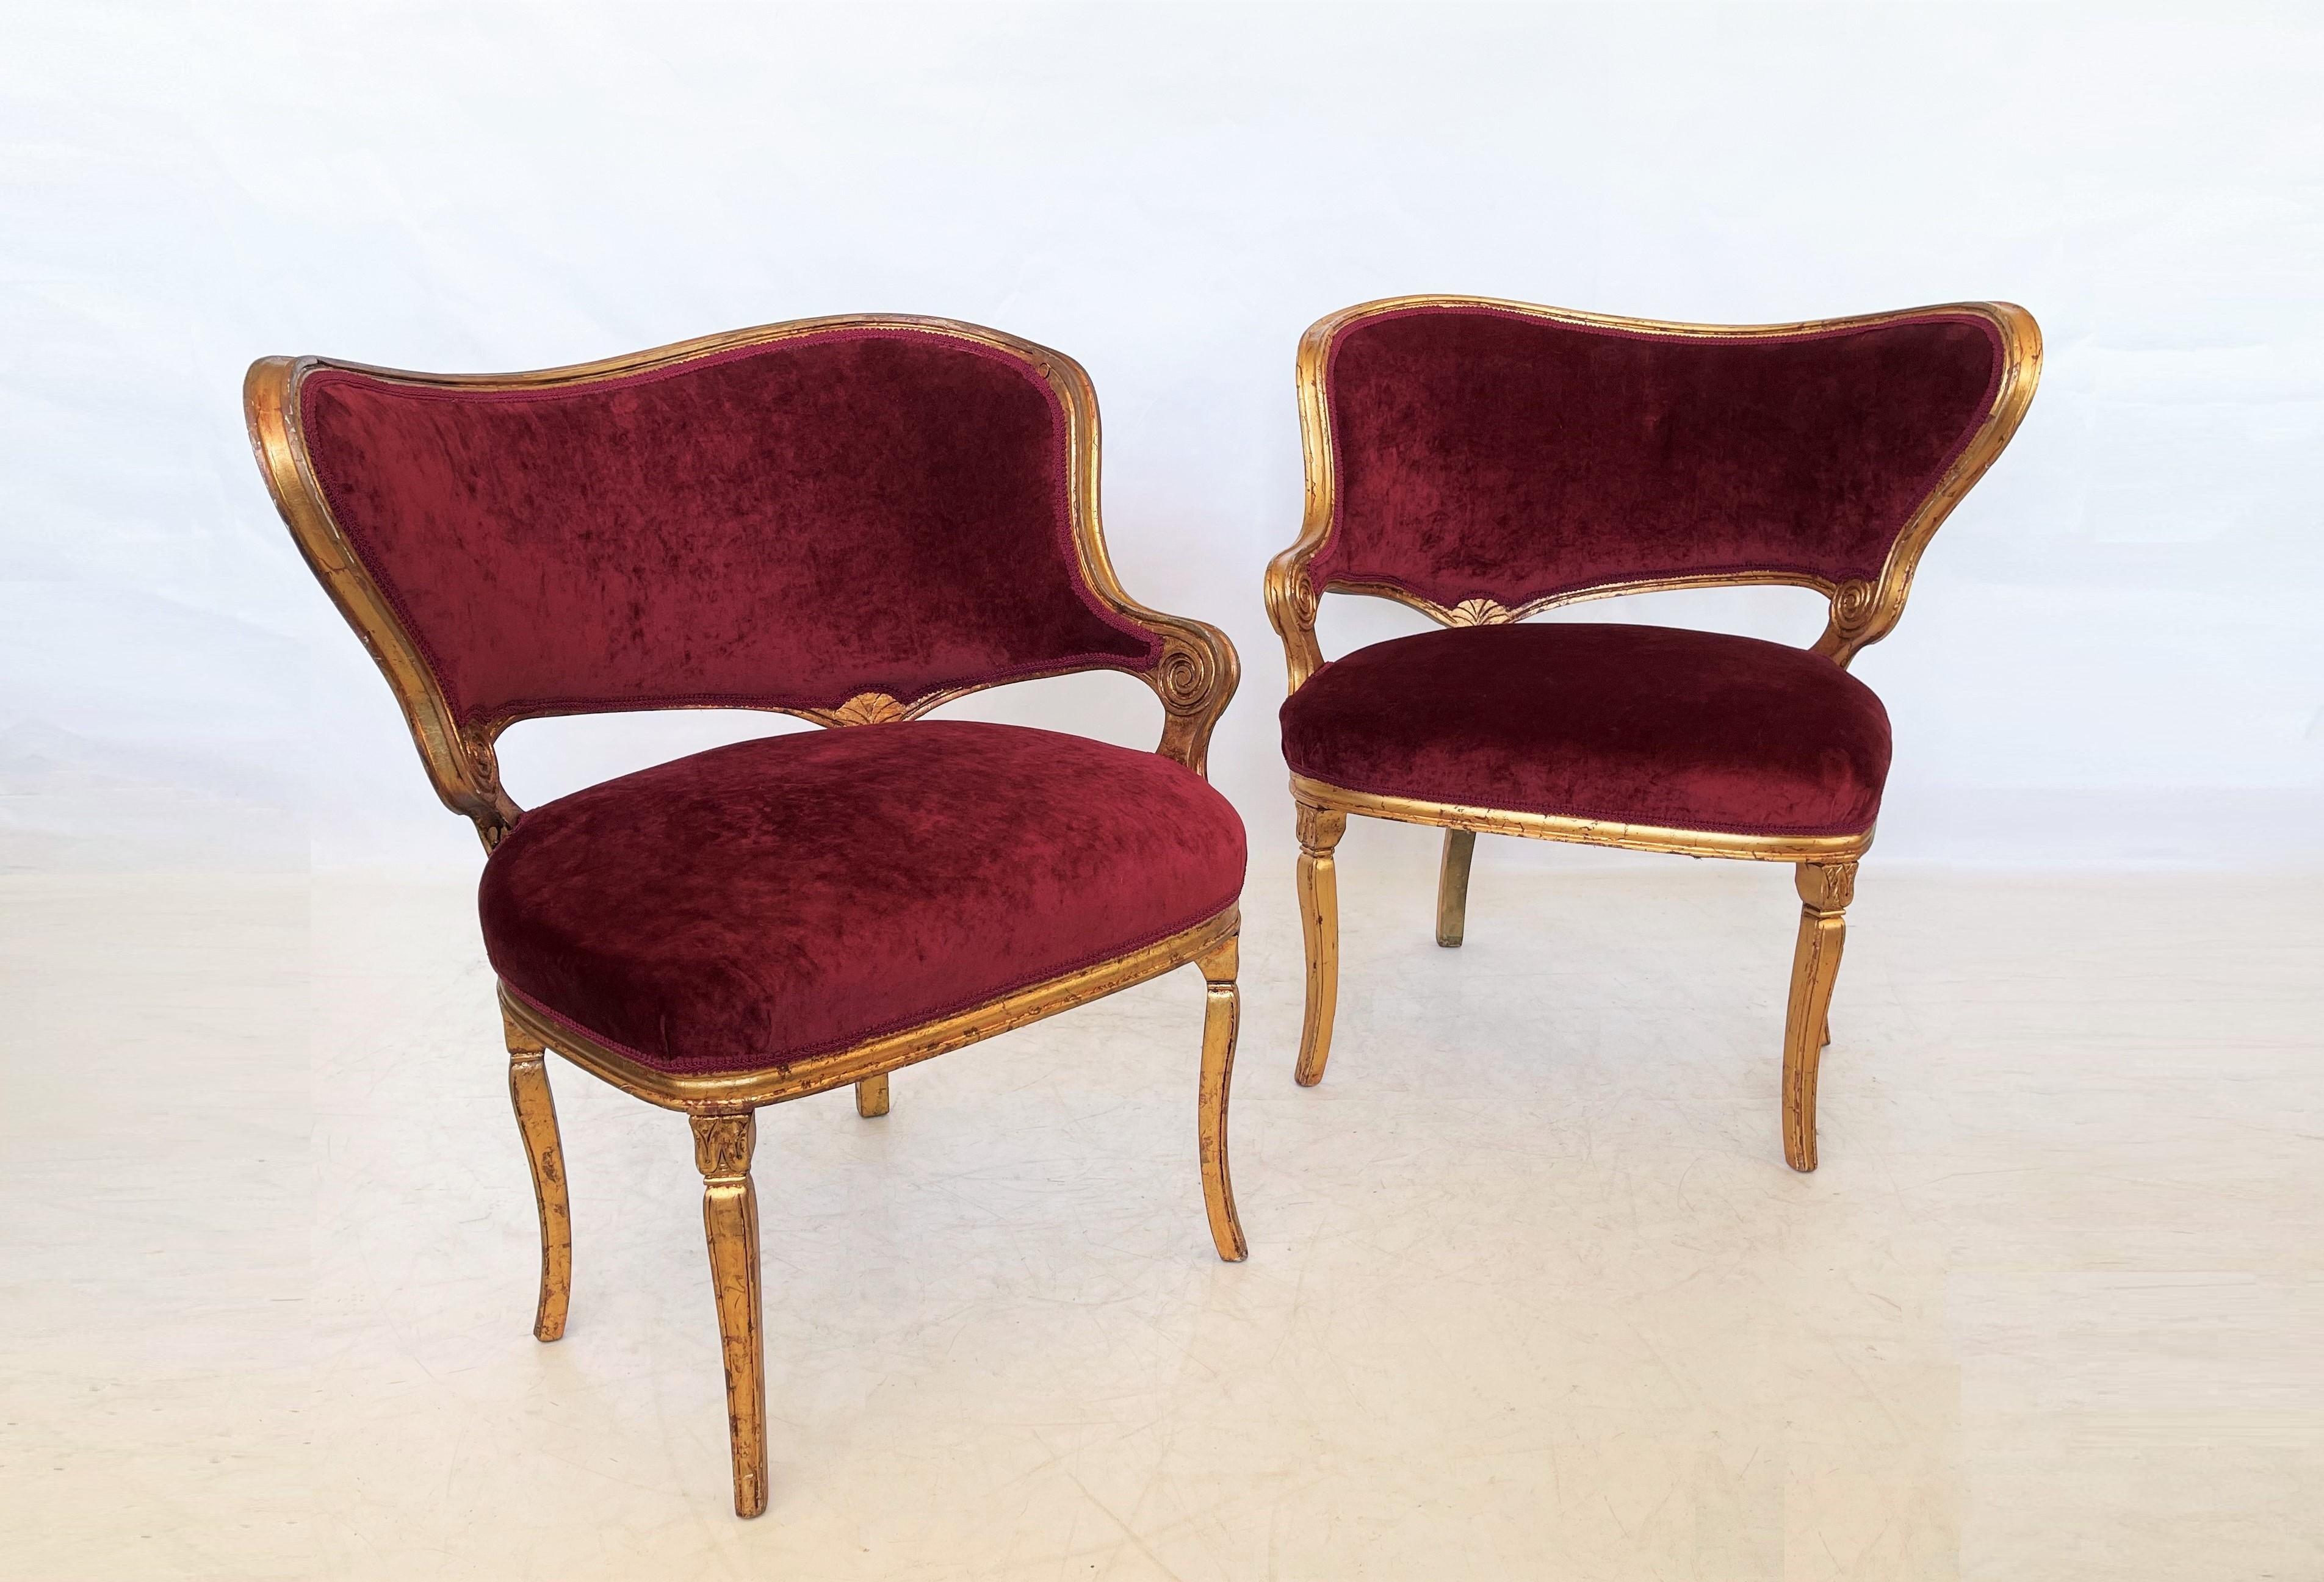 Elegant pair of mirror image asymmetrical Art Deco shell back parlor chairs in a wine colored upholstery. The pair features solid wood frames with gold leaf finish, curved backs, tapered legs, reeded carvings and very elegant form. The maker is